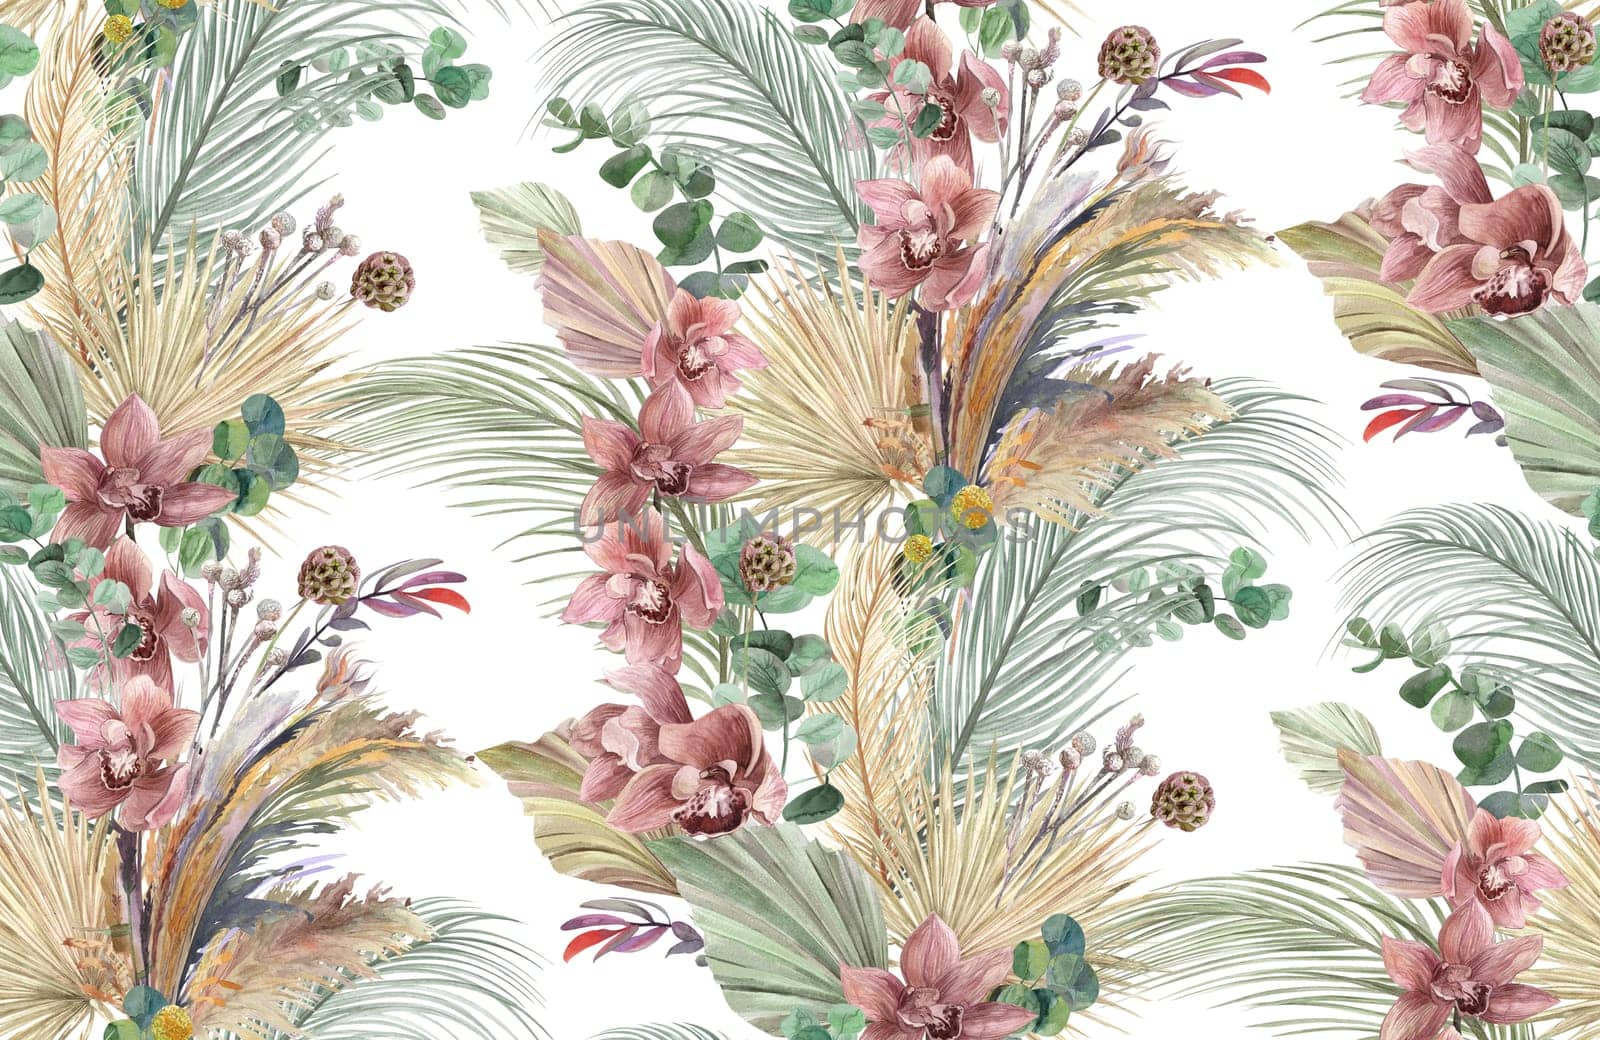 Seamless pattern with orchid flowers and herbarium of dry palm leaves and pampas grass on white background for textile and surface design